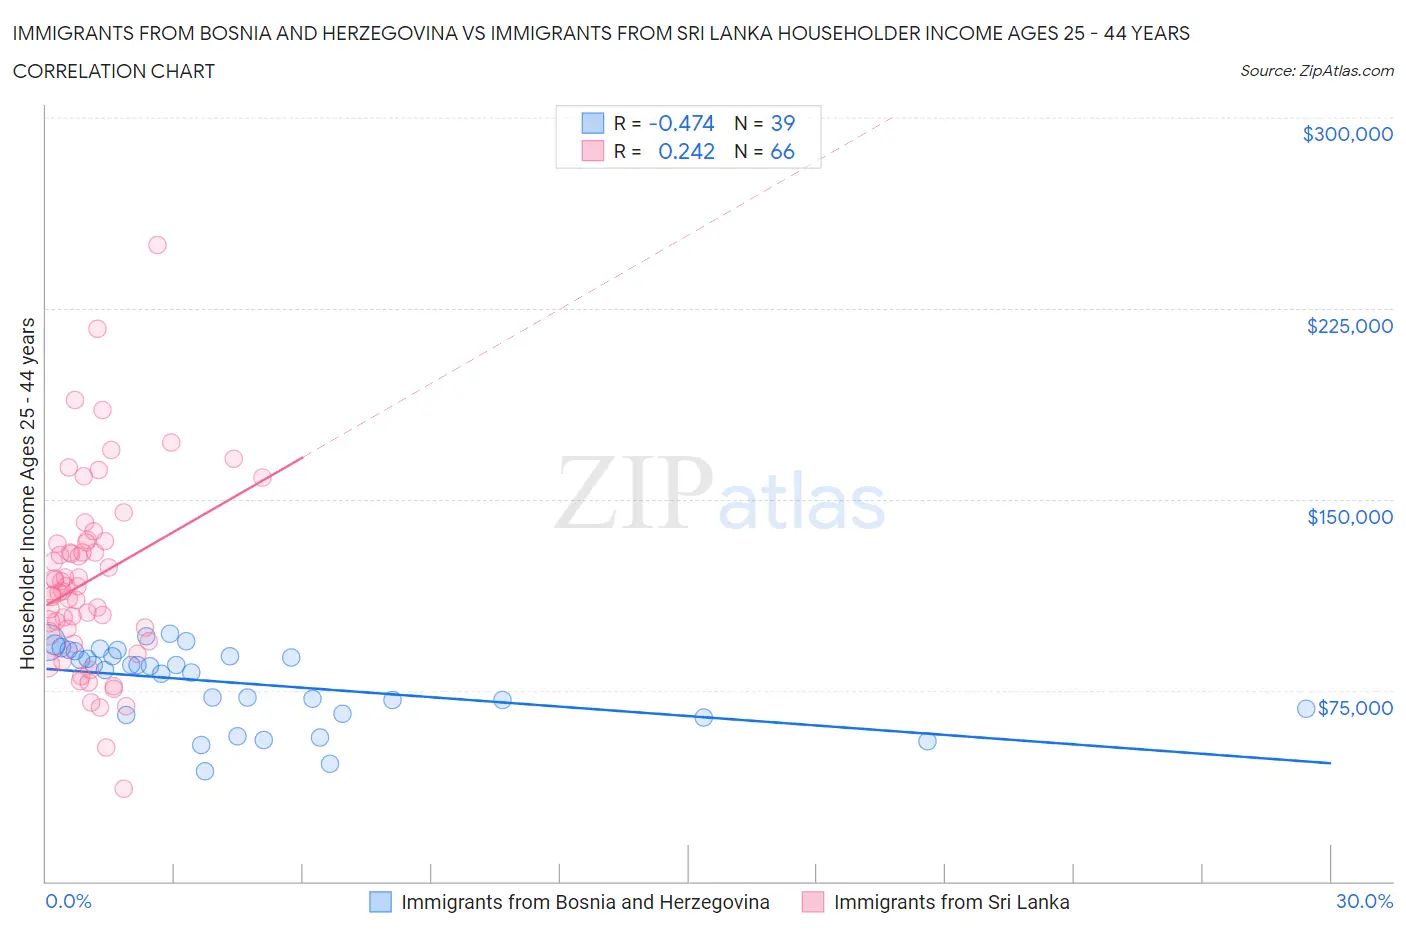 Immigrants from Bosnia and Herzegovina vs Immigrants from Sri Lanka Householder Income Ages 25 - 44 years